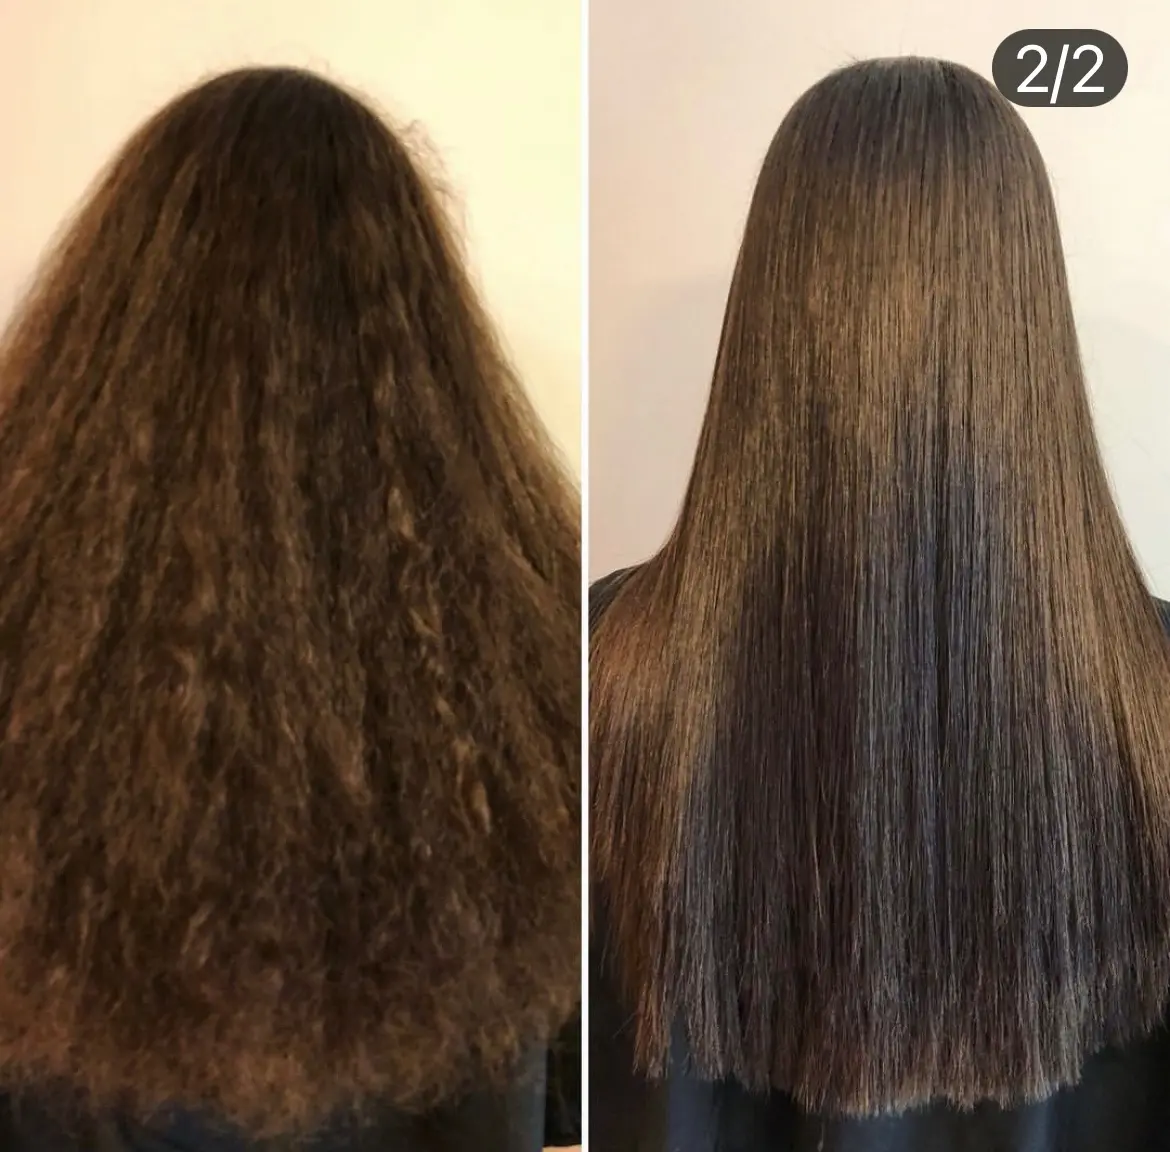 Japanese Hair Straightening before and after